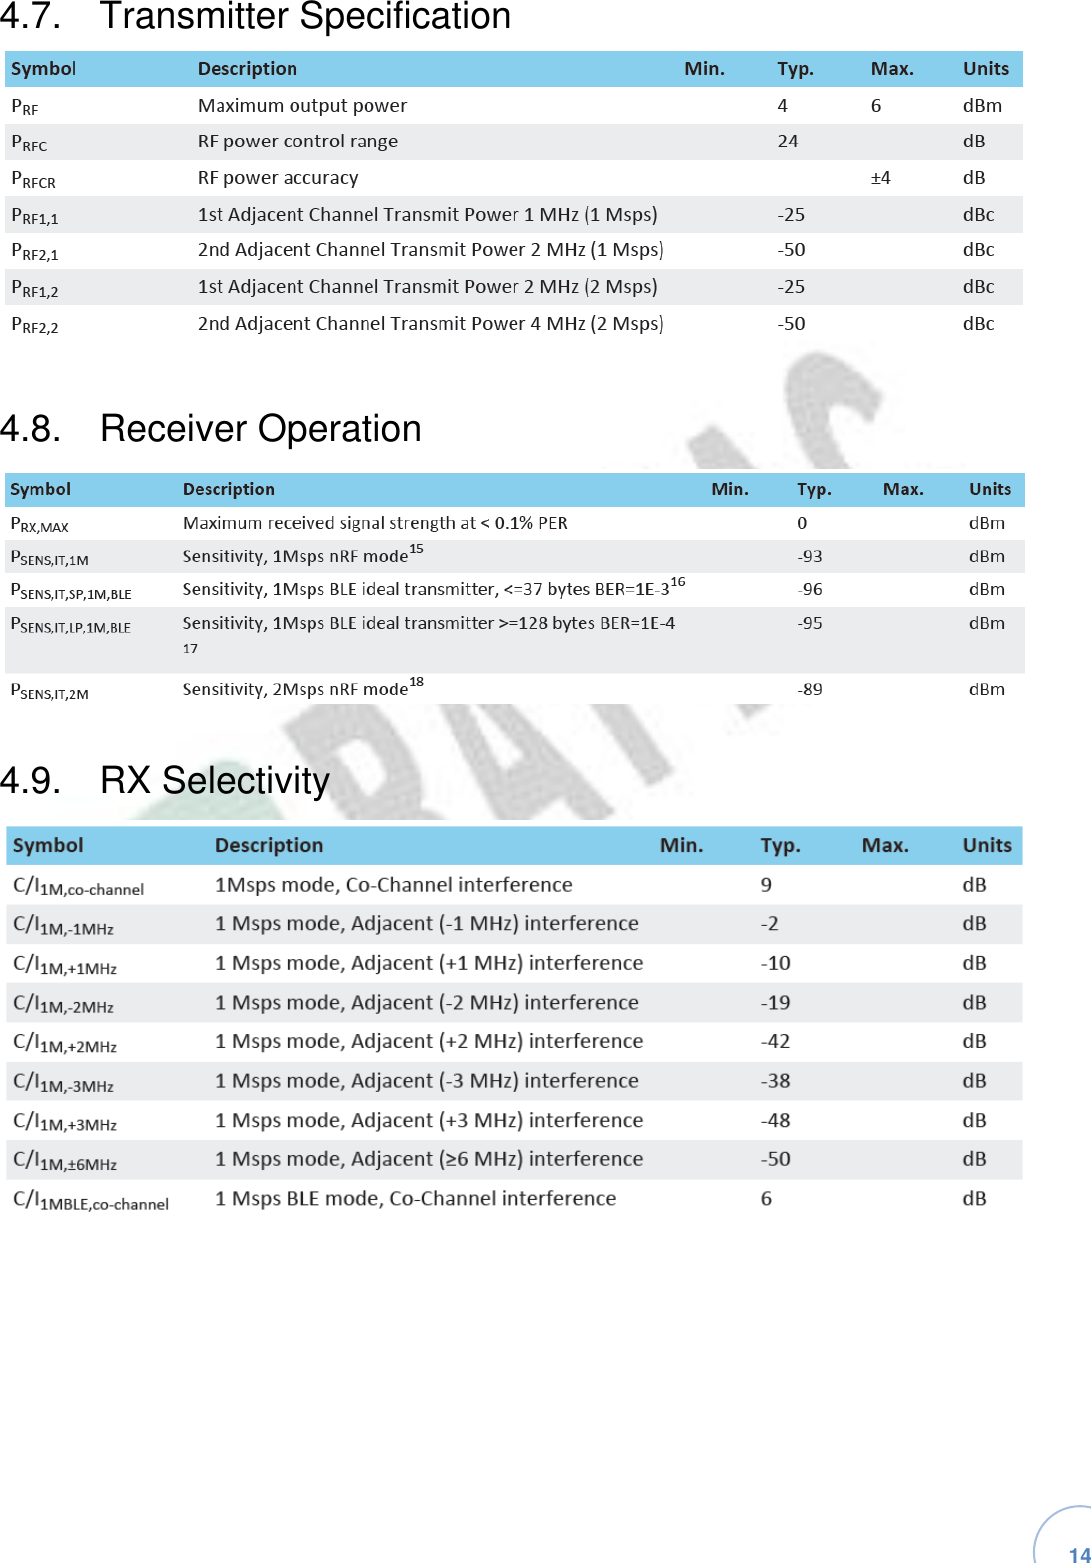   14 4.7.  Transmitter Specification4.8.  Receiver Operation4.9.  RX Selectivity